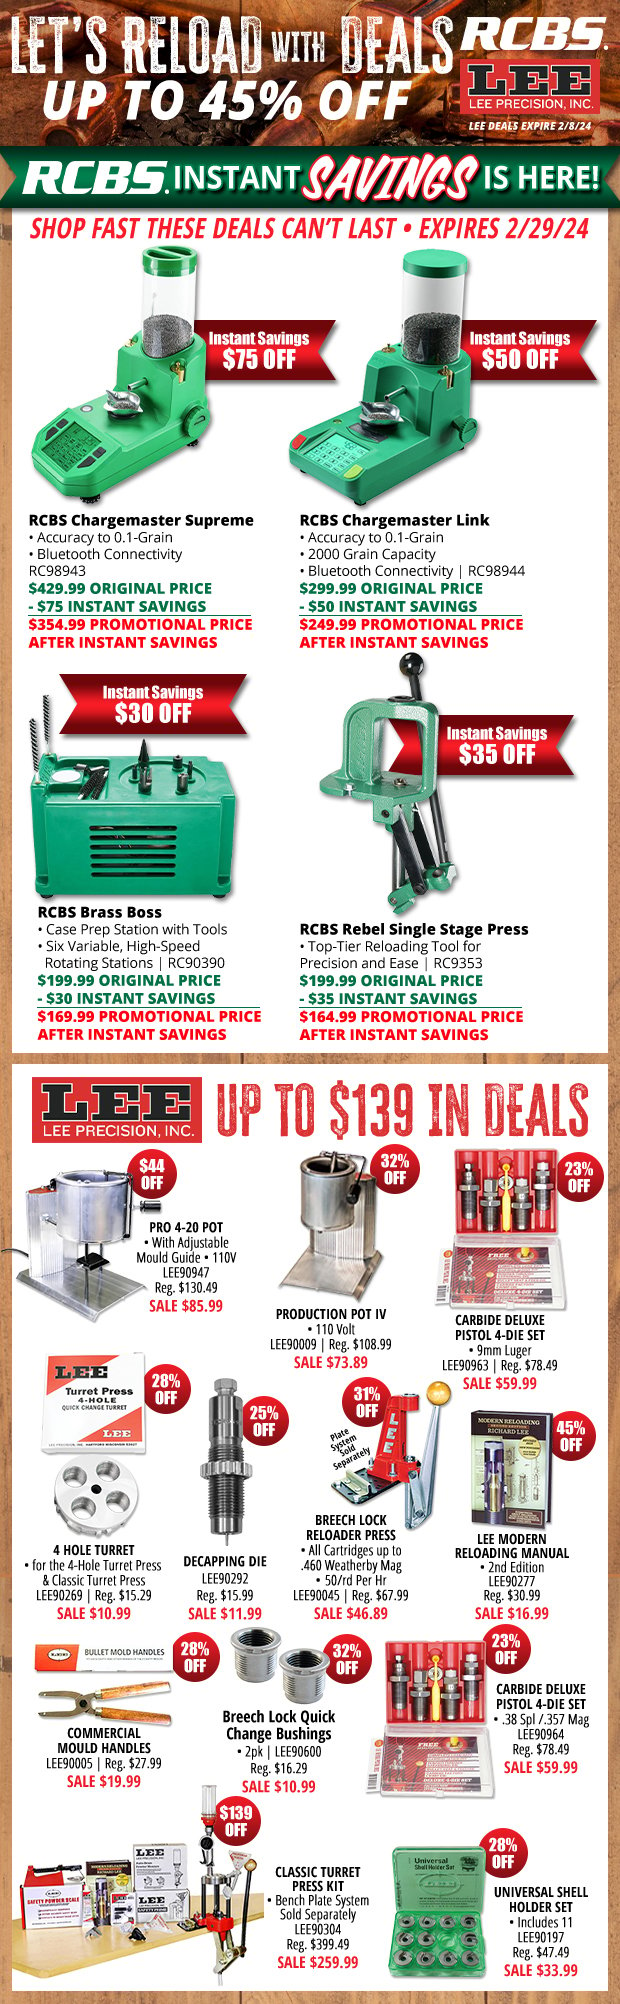 Up to 45% Off Reloading Deals with RCBS and Lee